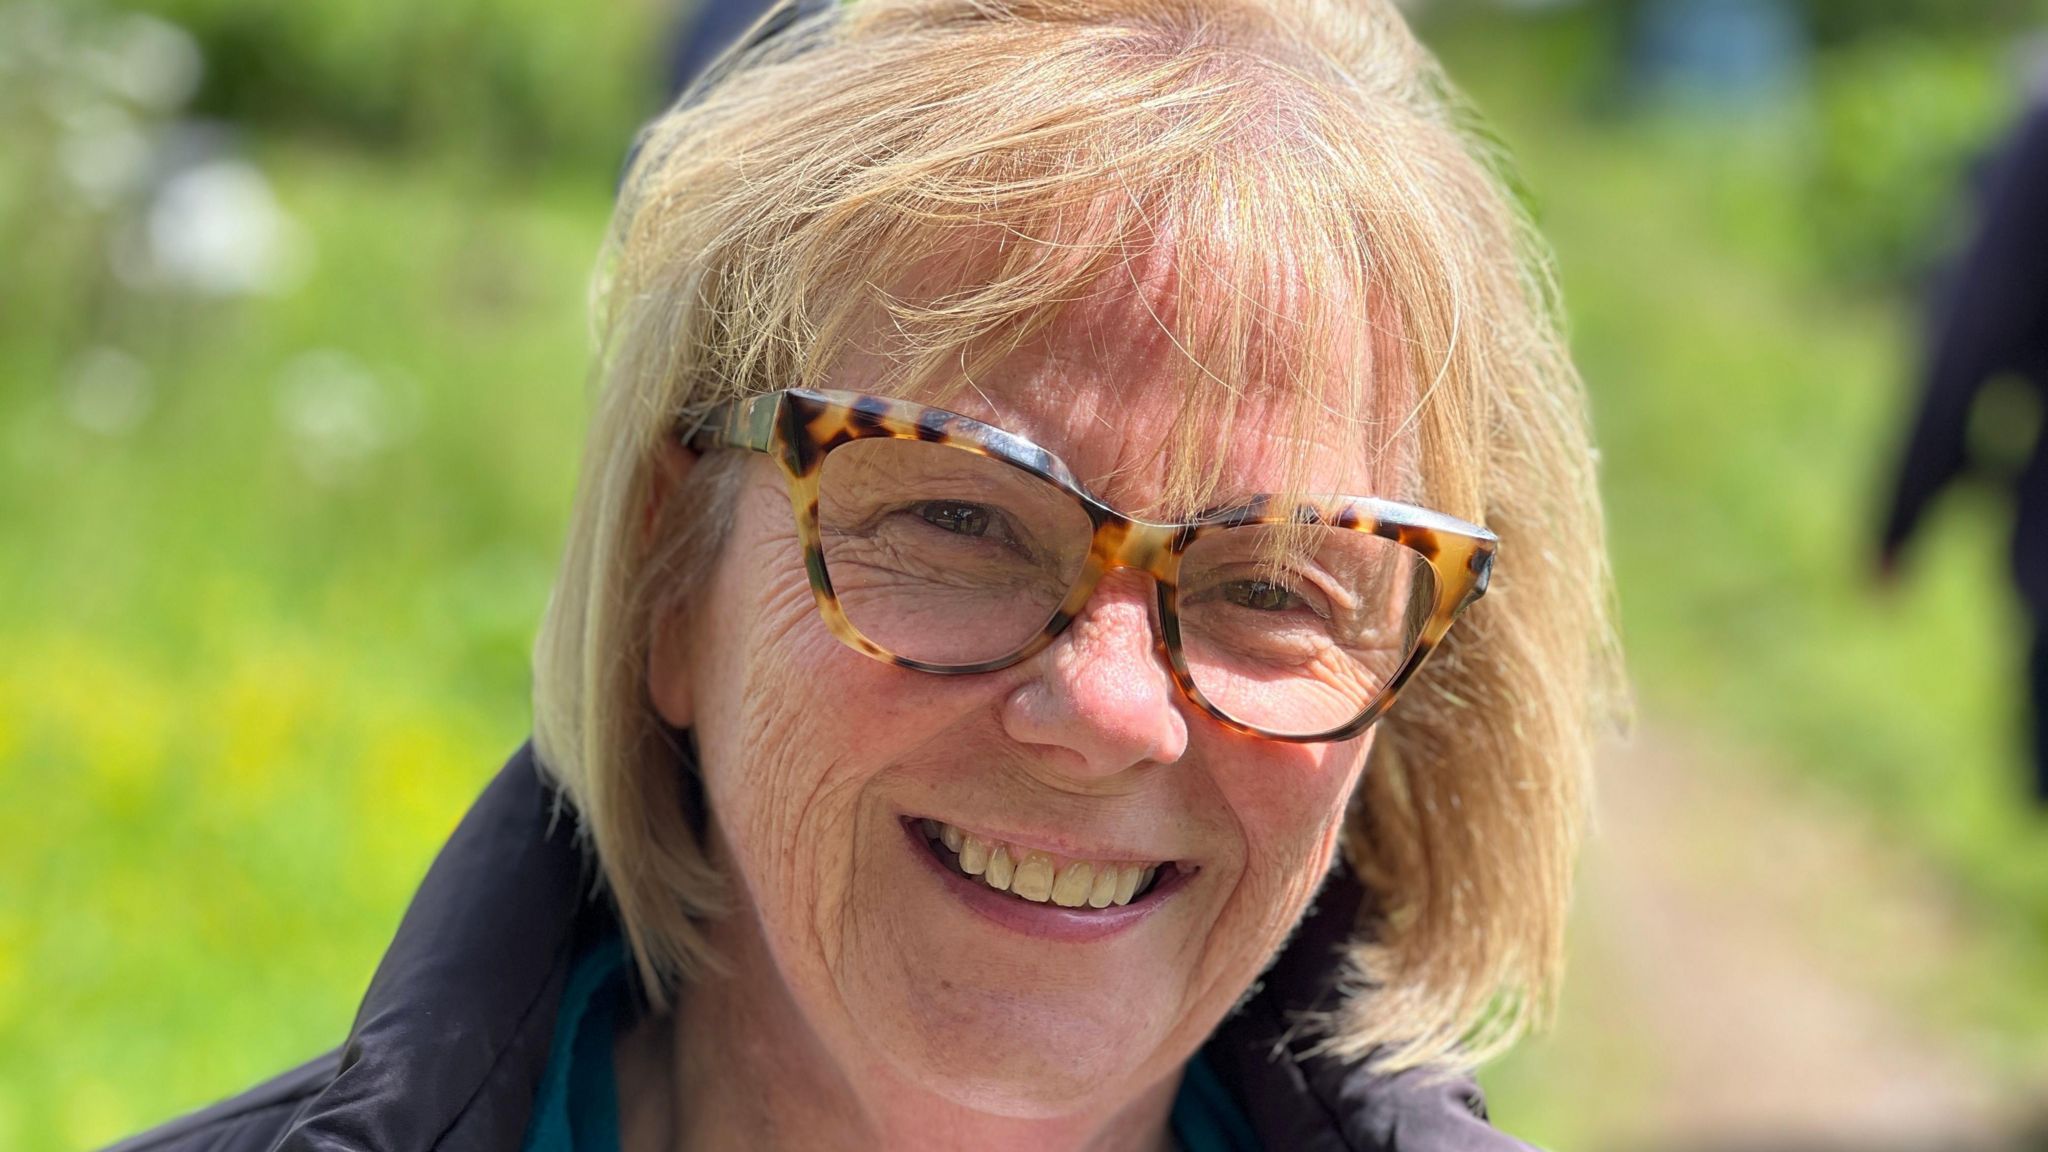 Close up portrait of Bernadette Knight wearing glasses and smiling as she stands in the allotments